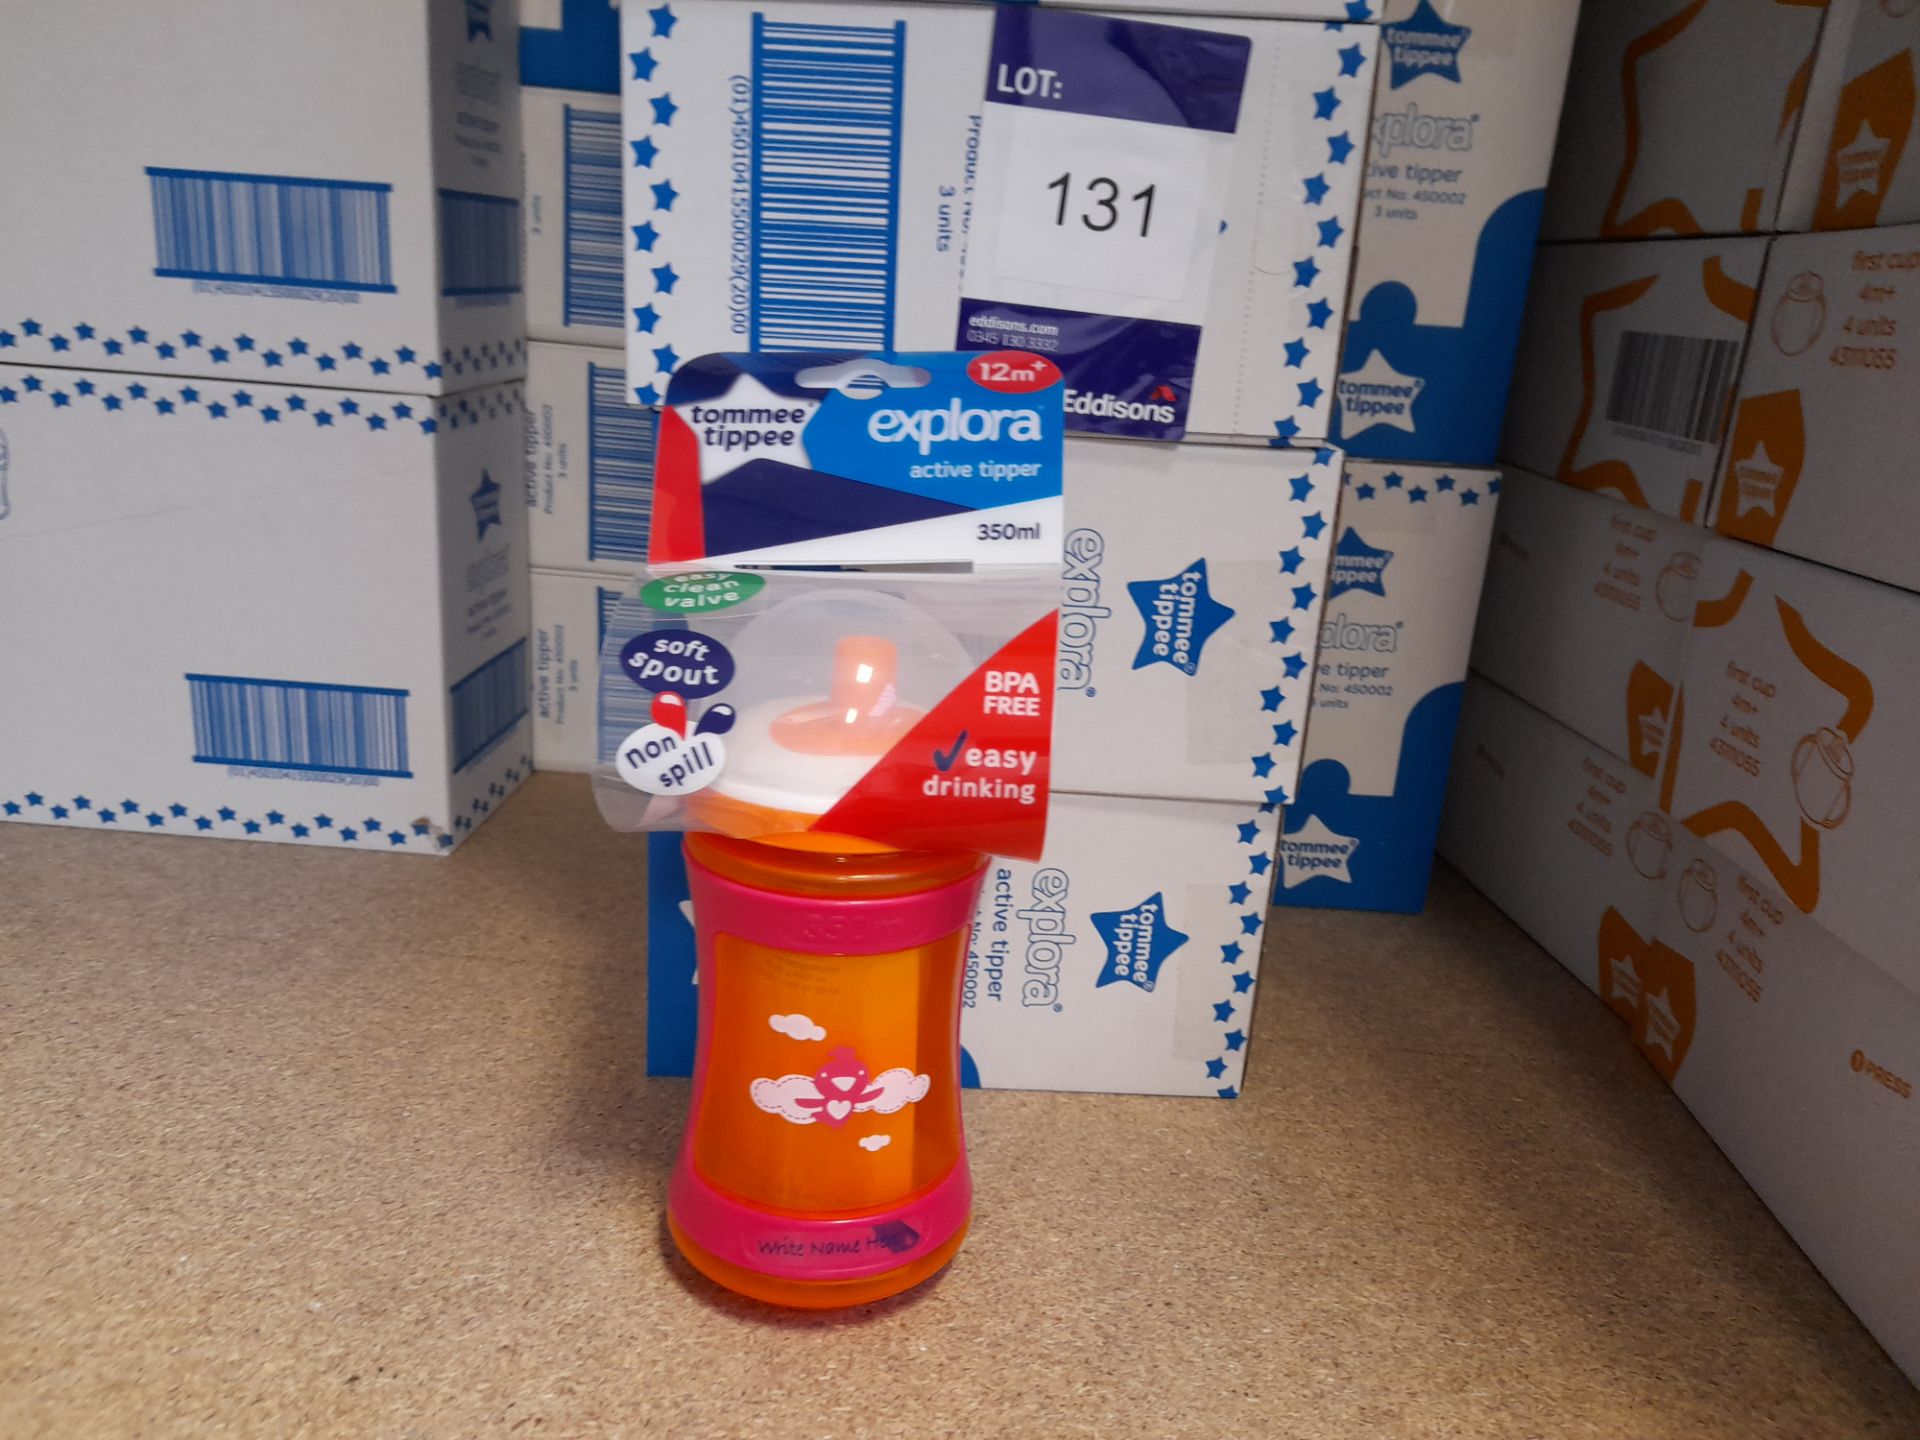 Quantity of Tommee Tippee Explora active tipper to - Image 2 of 2